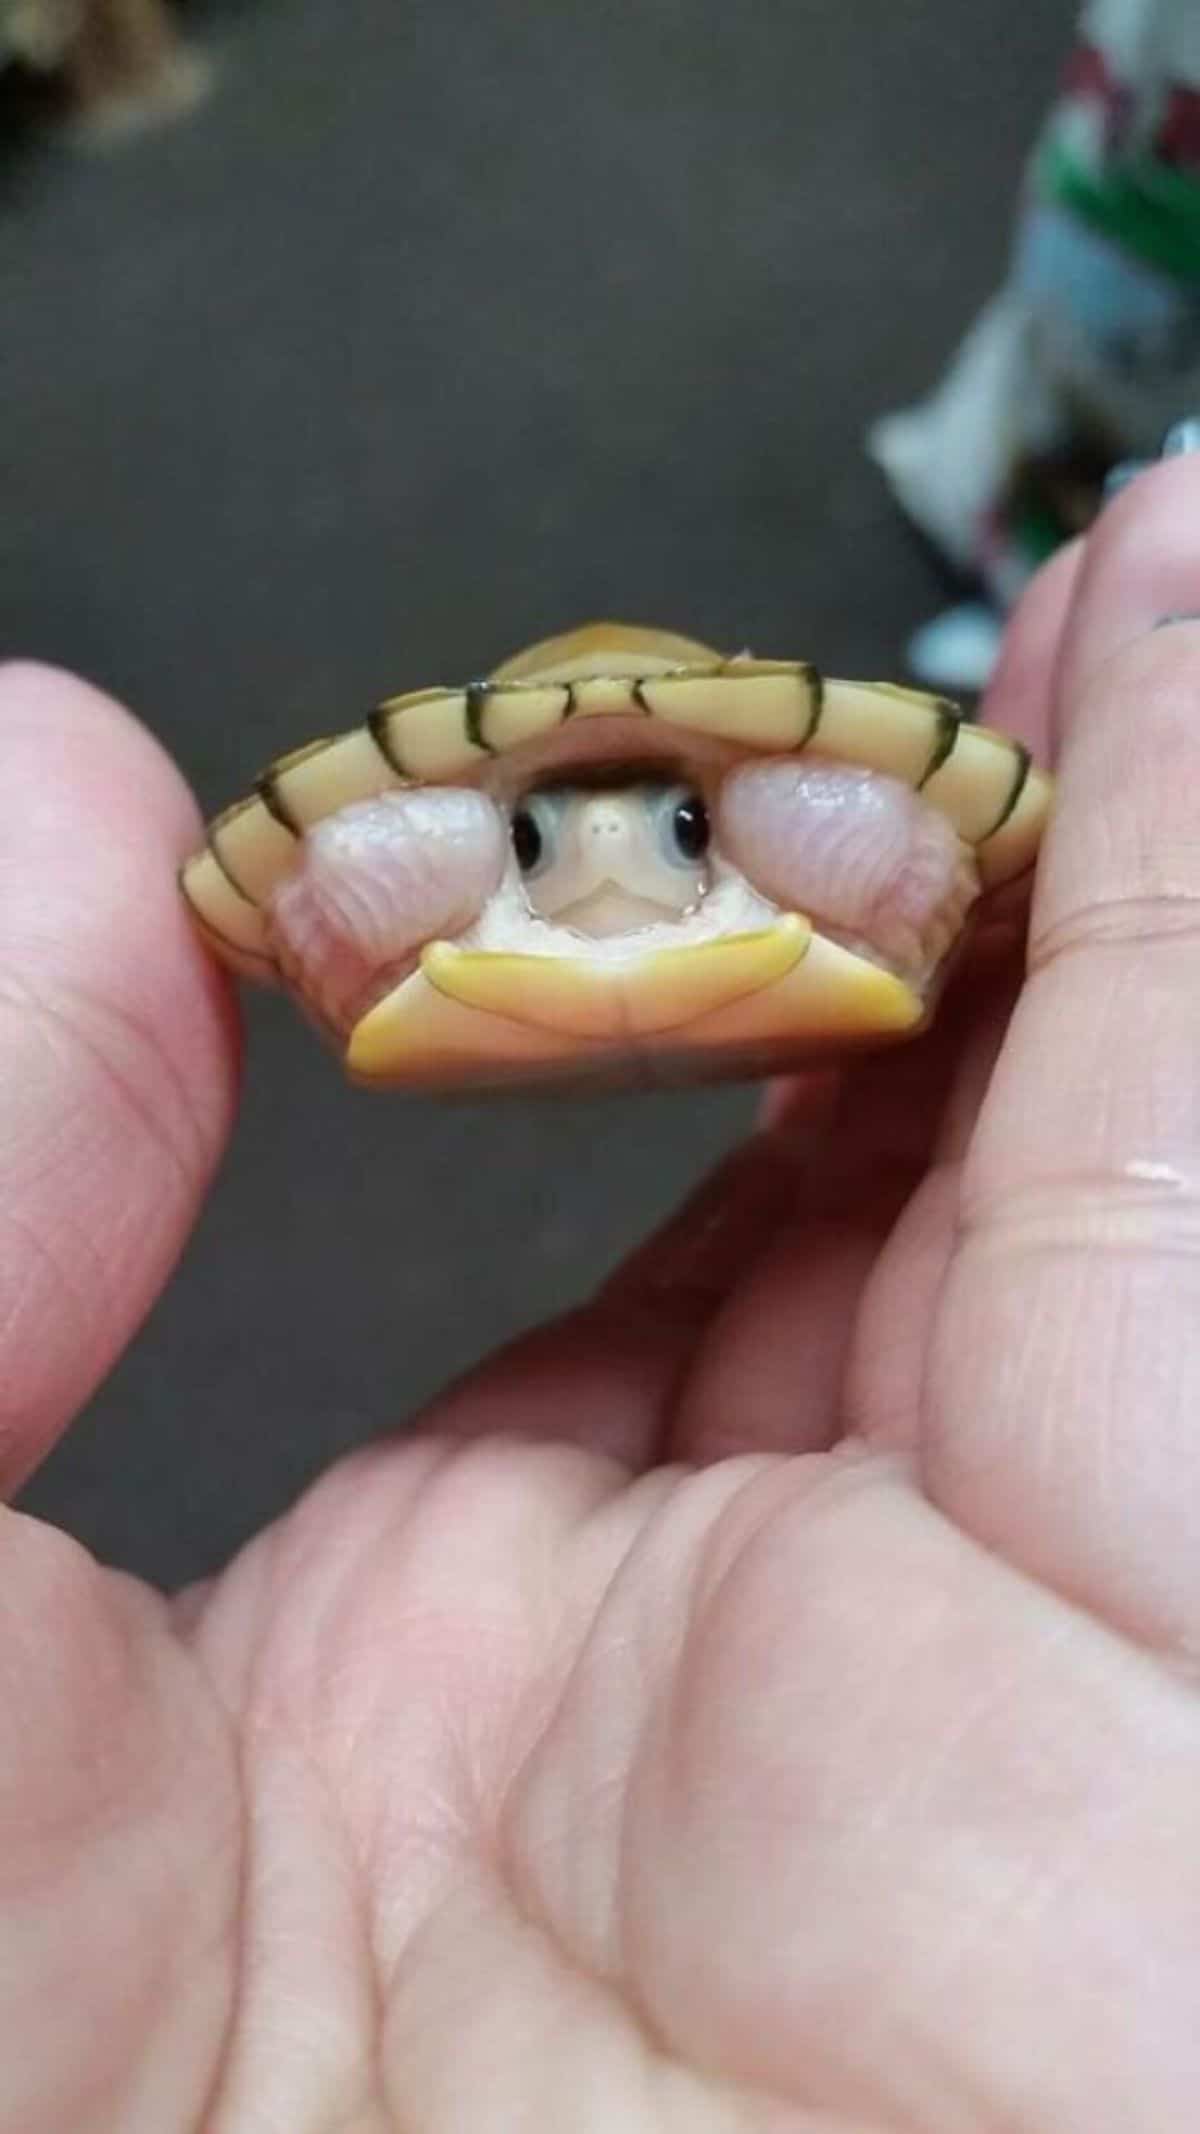 baby tortoise inside its shell being held in someone's hand